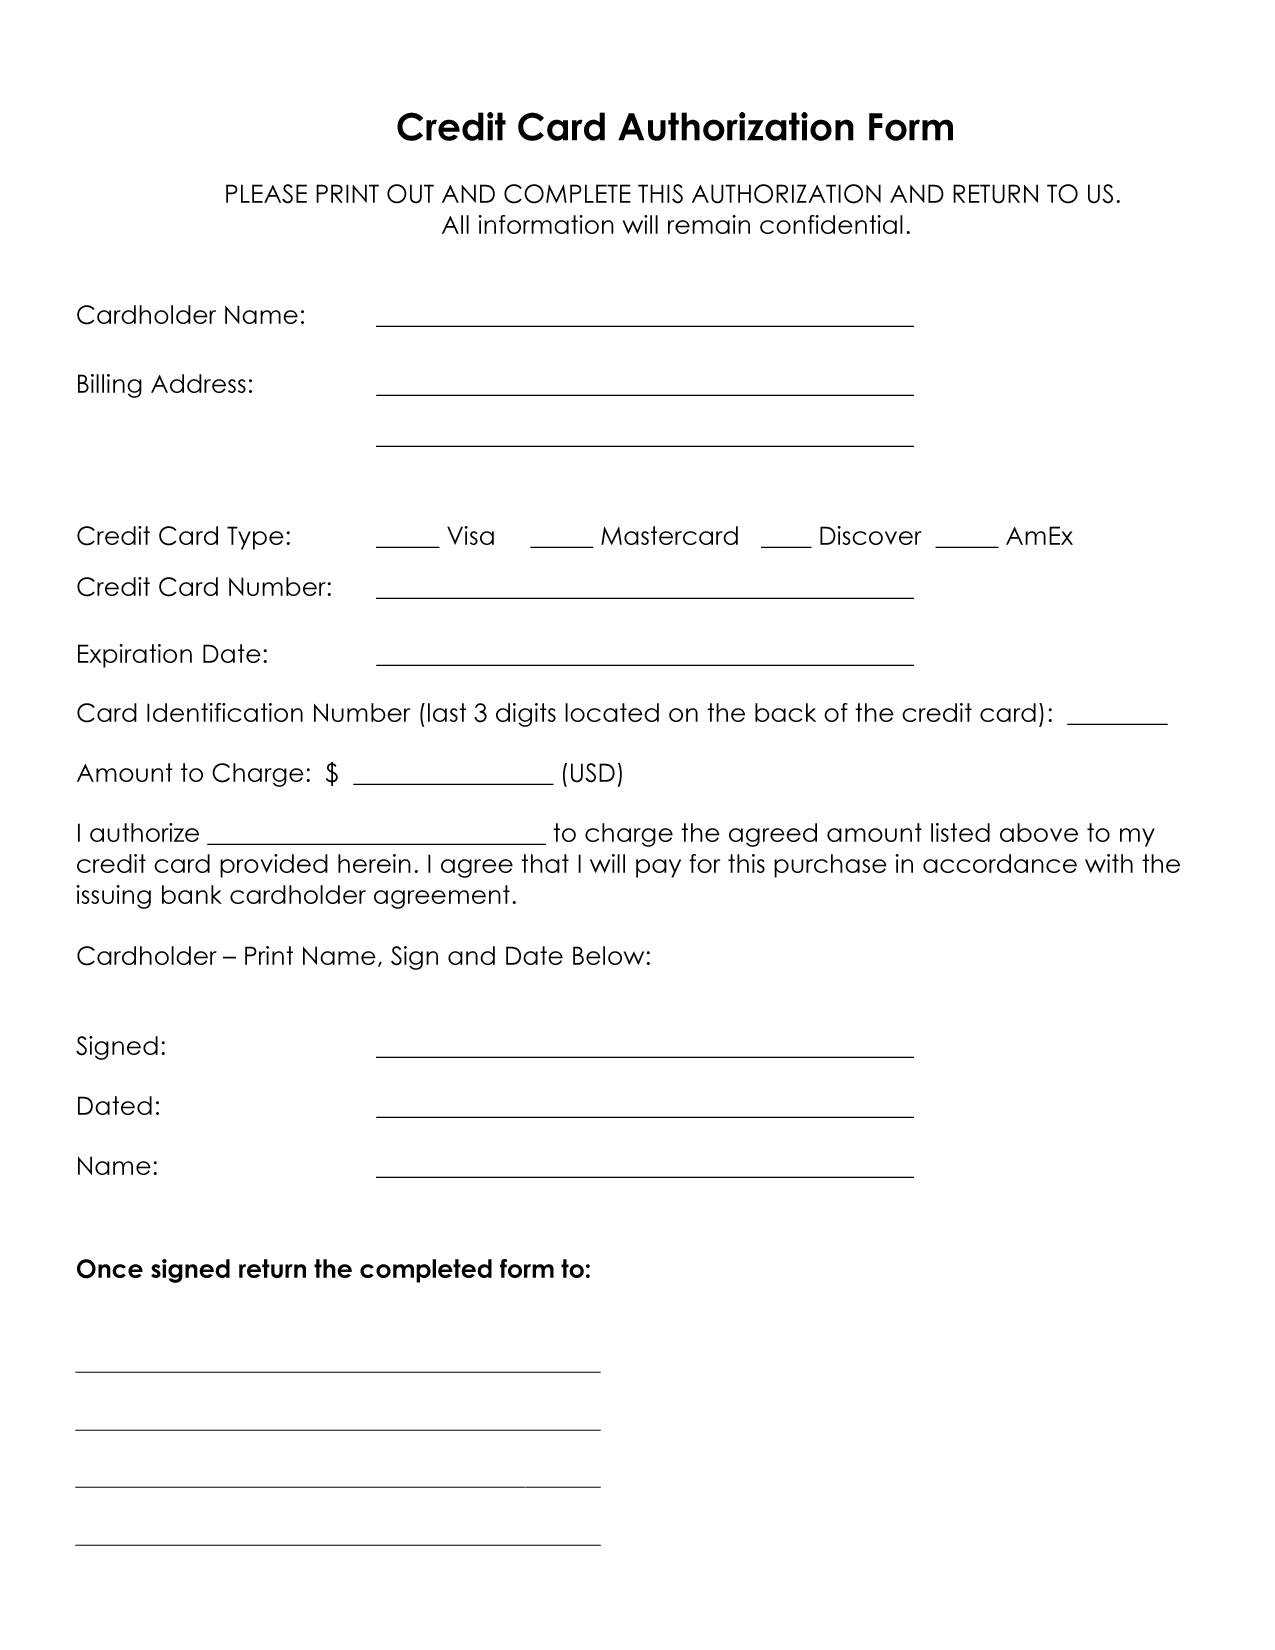 Free Credit Card Authorization Form Template - Calep Regarding Authorization To Charge Credit Card Template